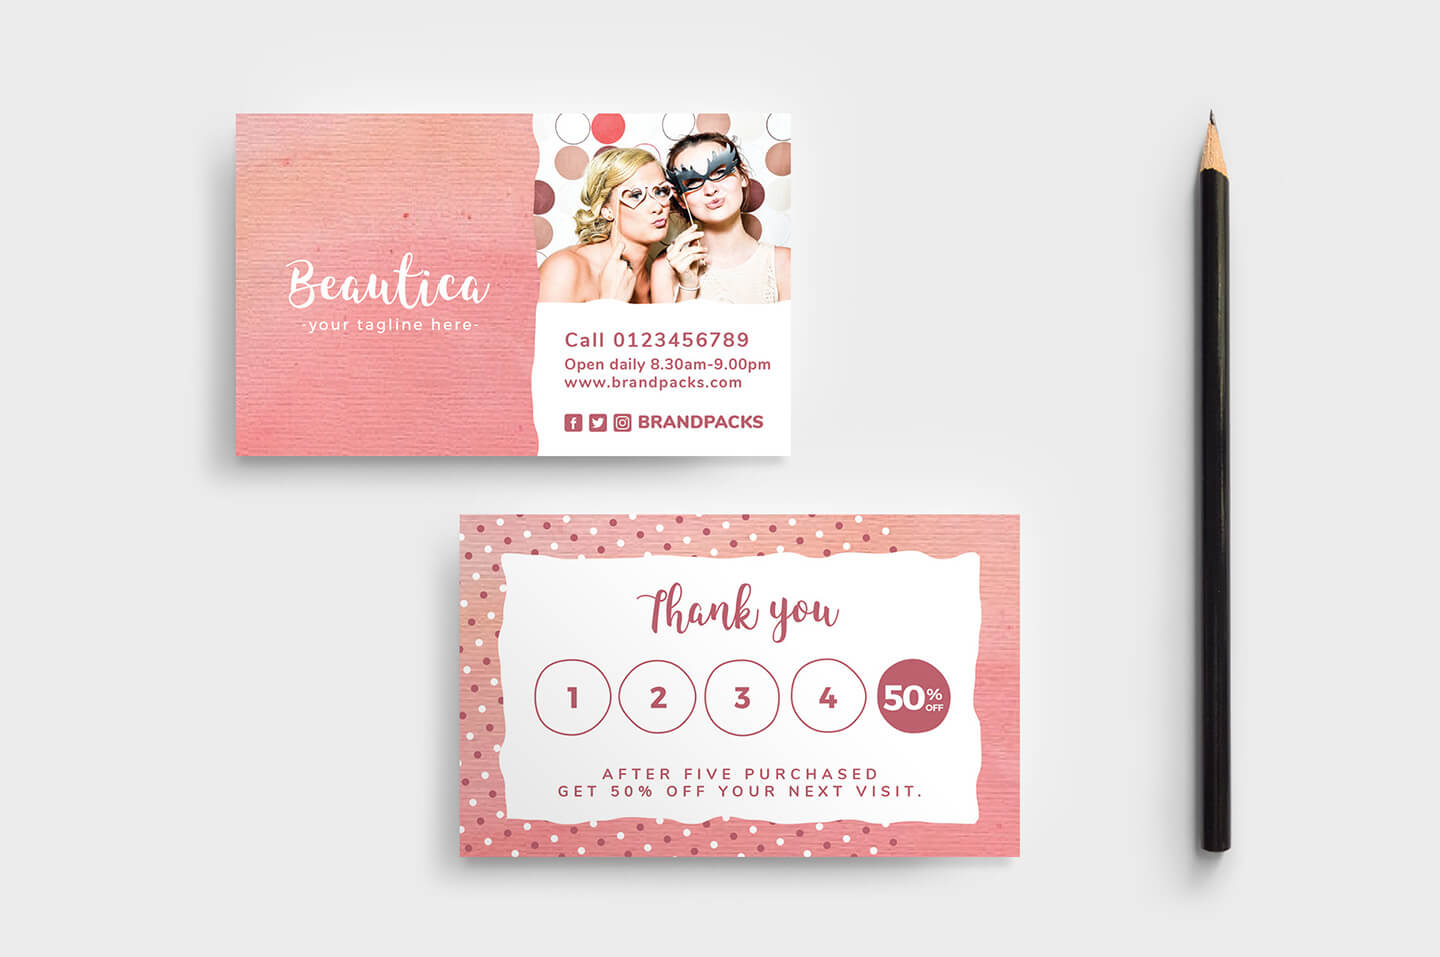 Free Loyalty Card Templates - Psd, Ai & Vector - Brandpacks For Loyalty Card Design Template